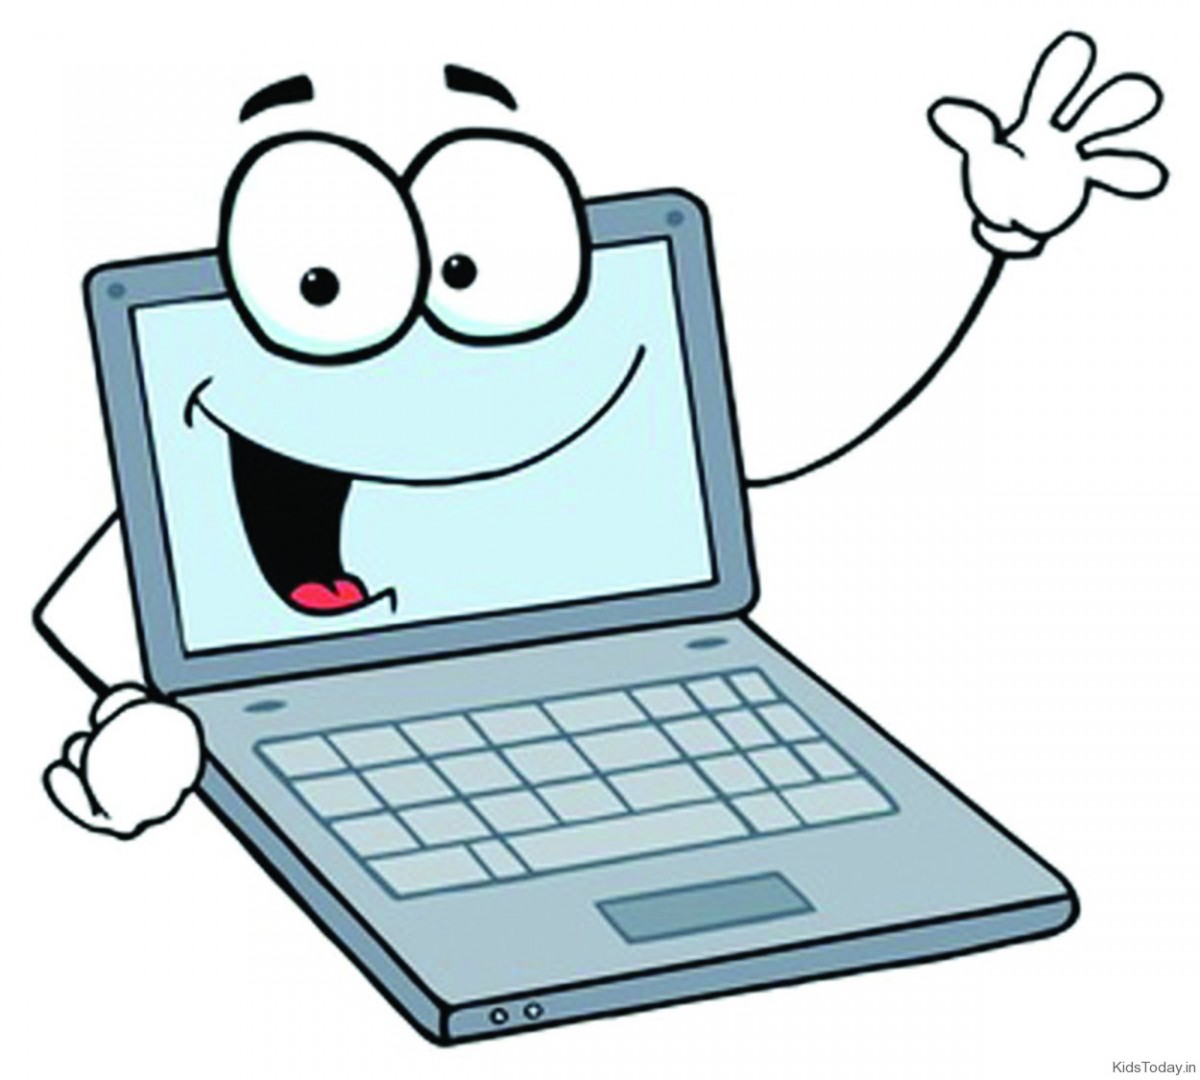 definition of clipart in ict - photo #44